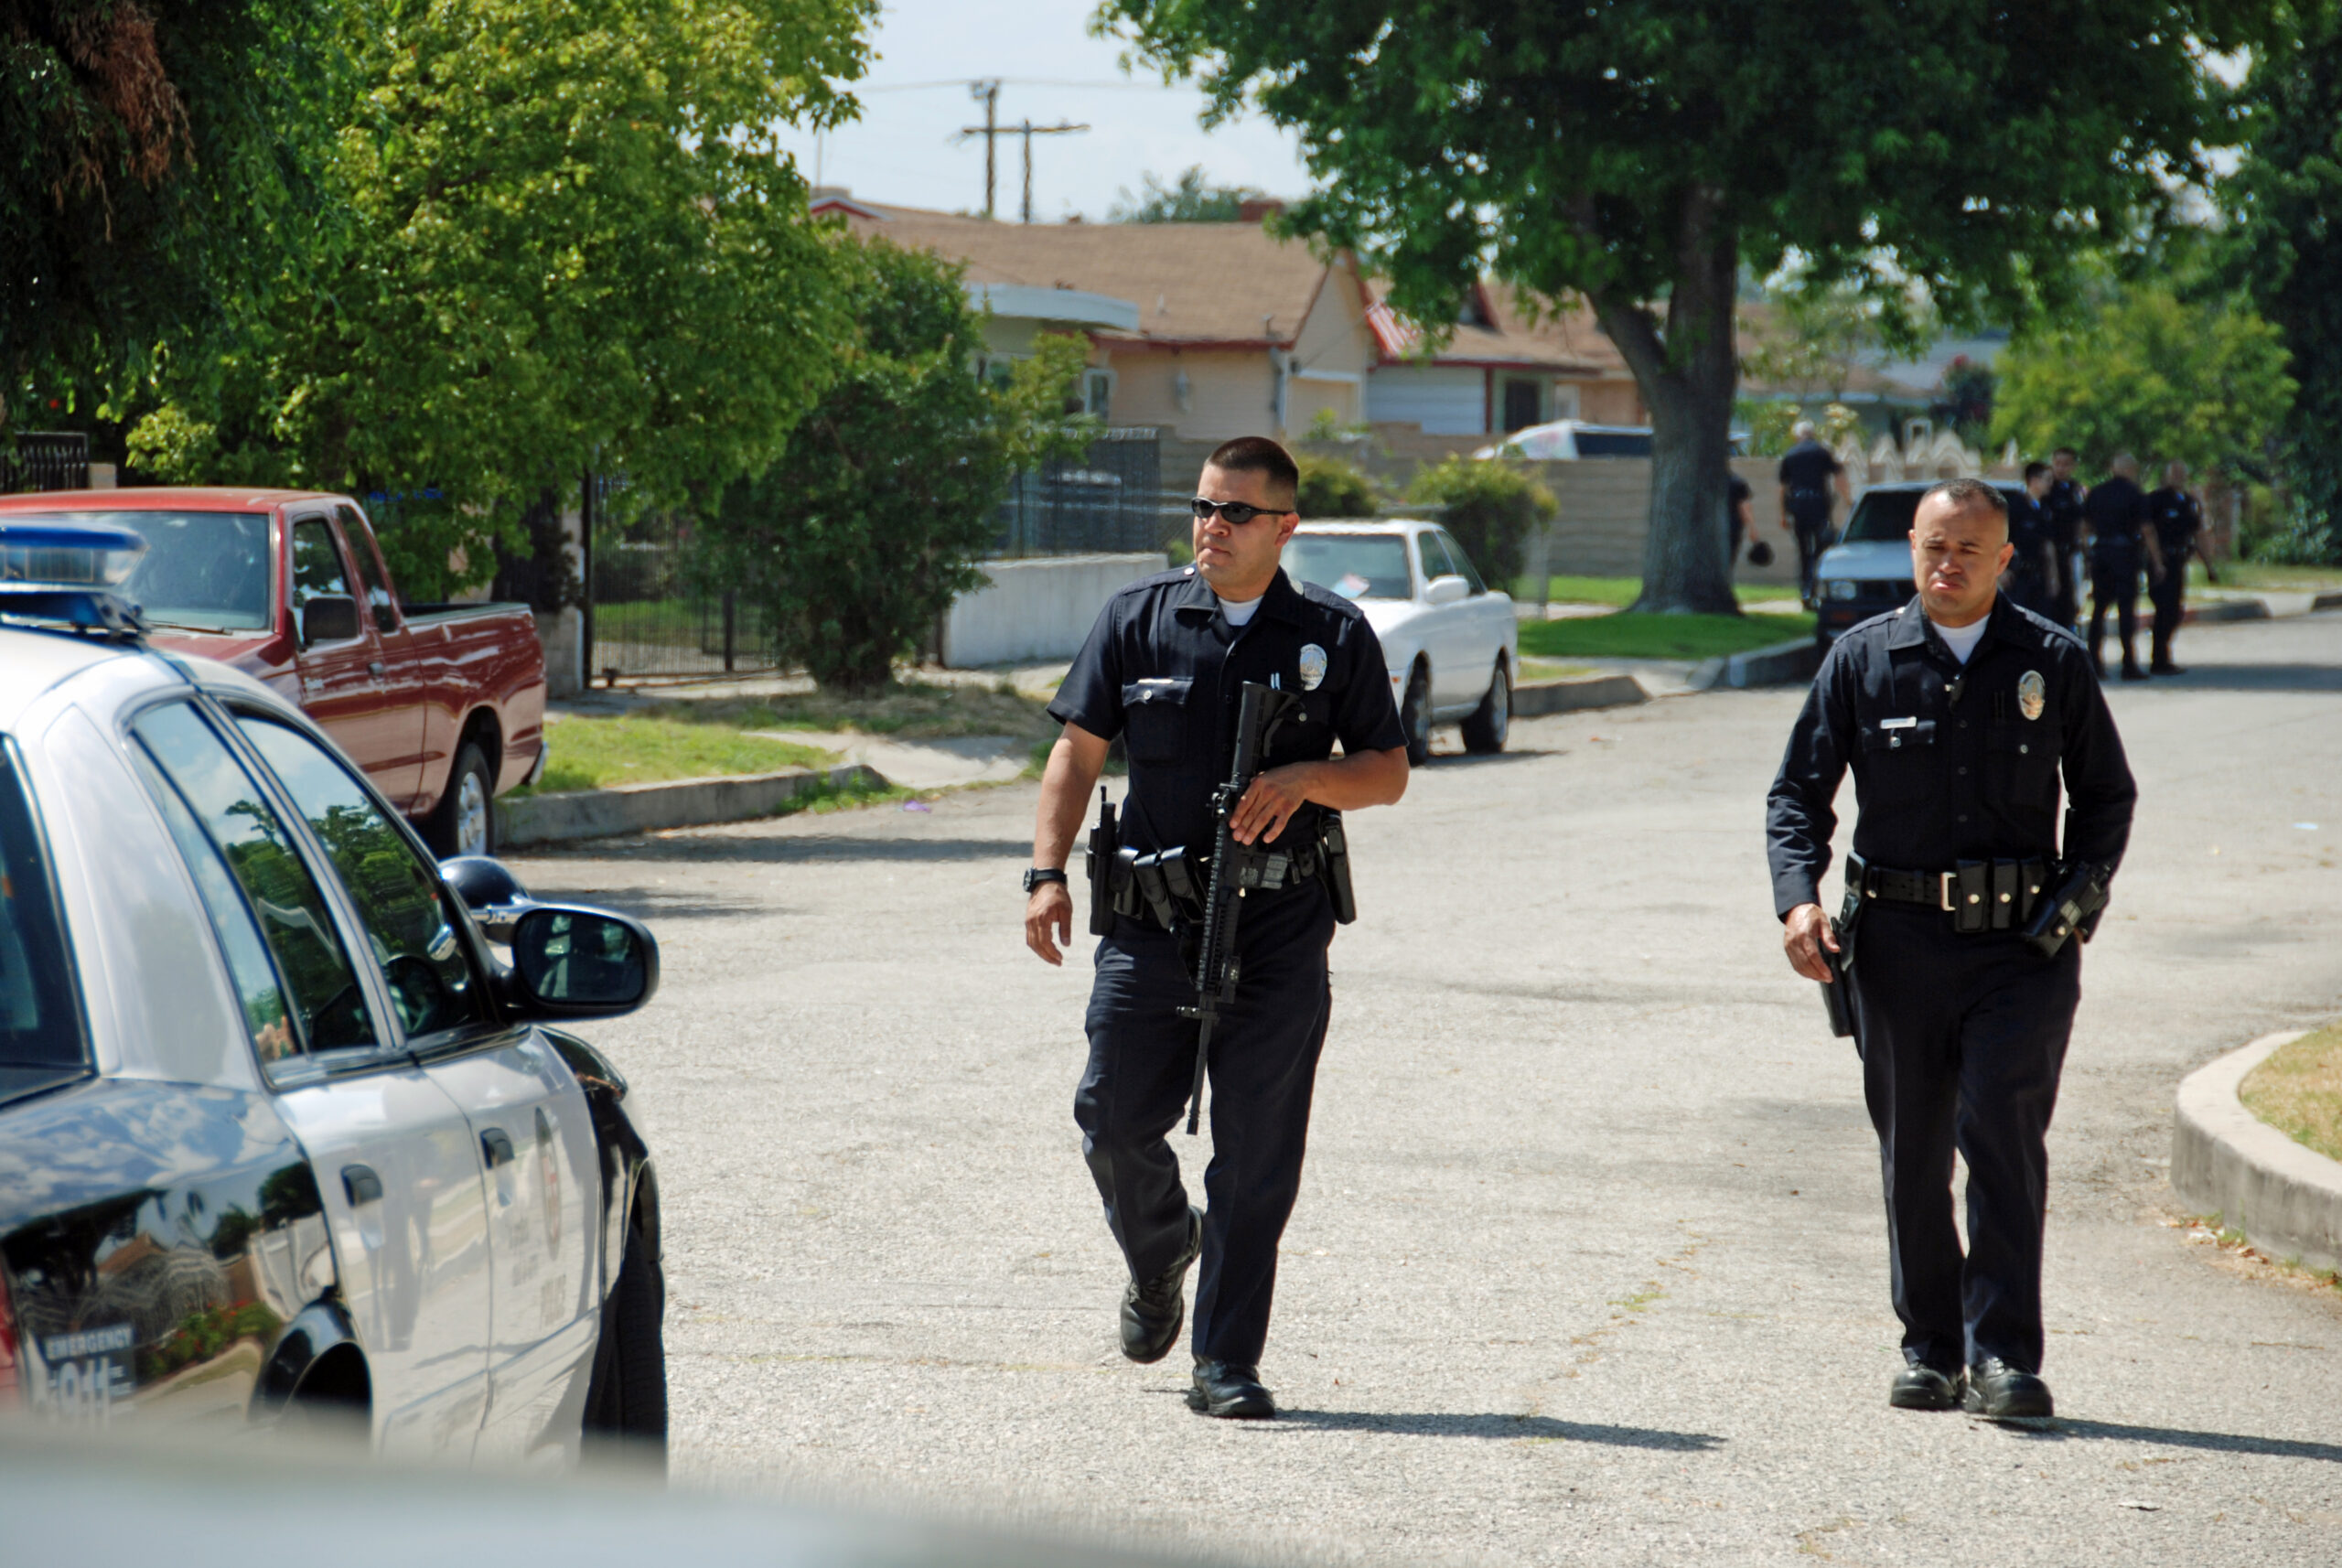 On July 1 at around 3:15 pm an injury report involving an LAPD bicycle officer was made. Canyon News, Lapd officer